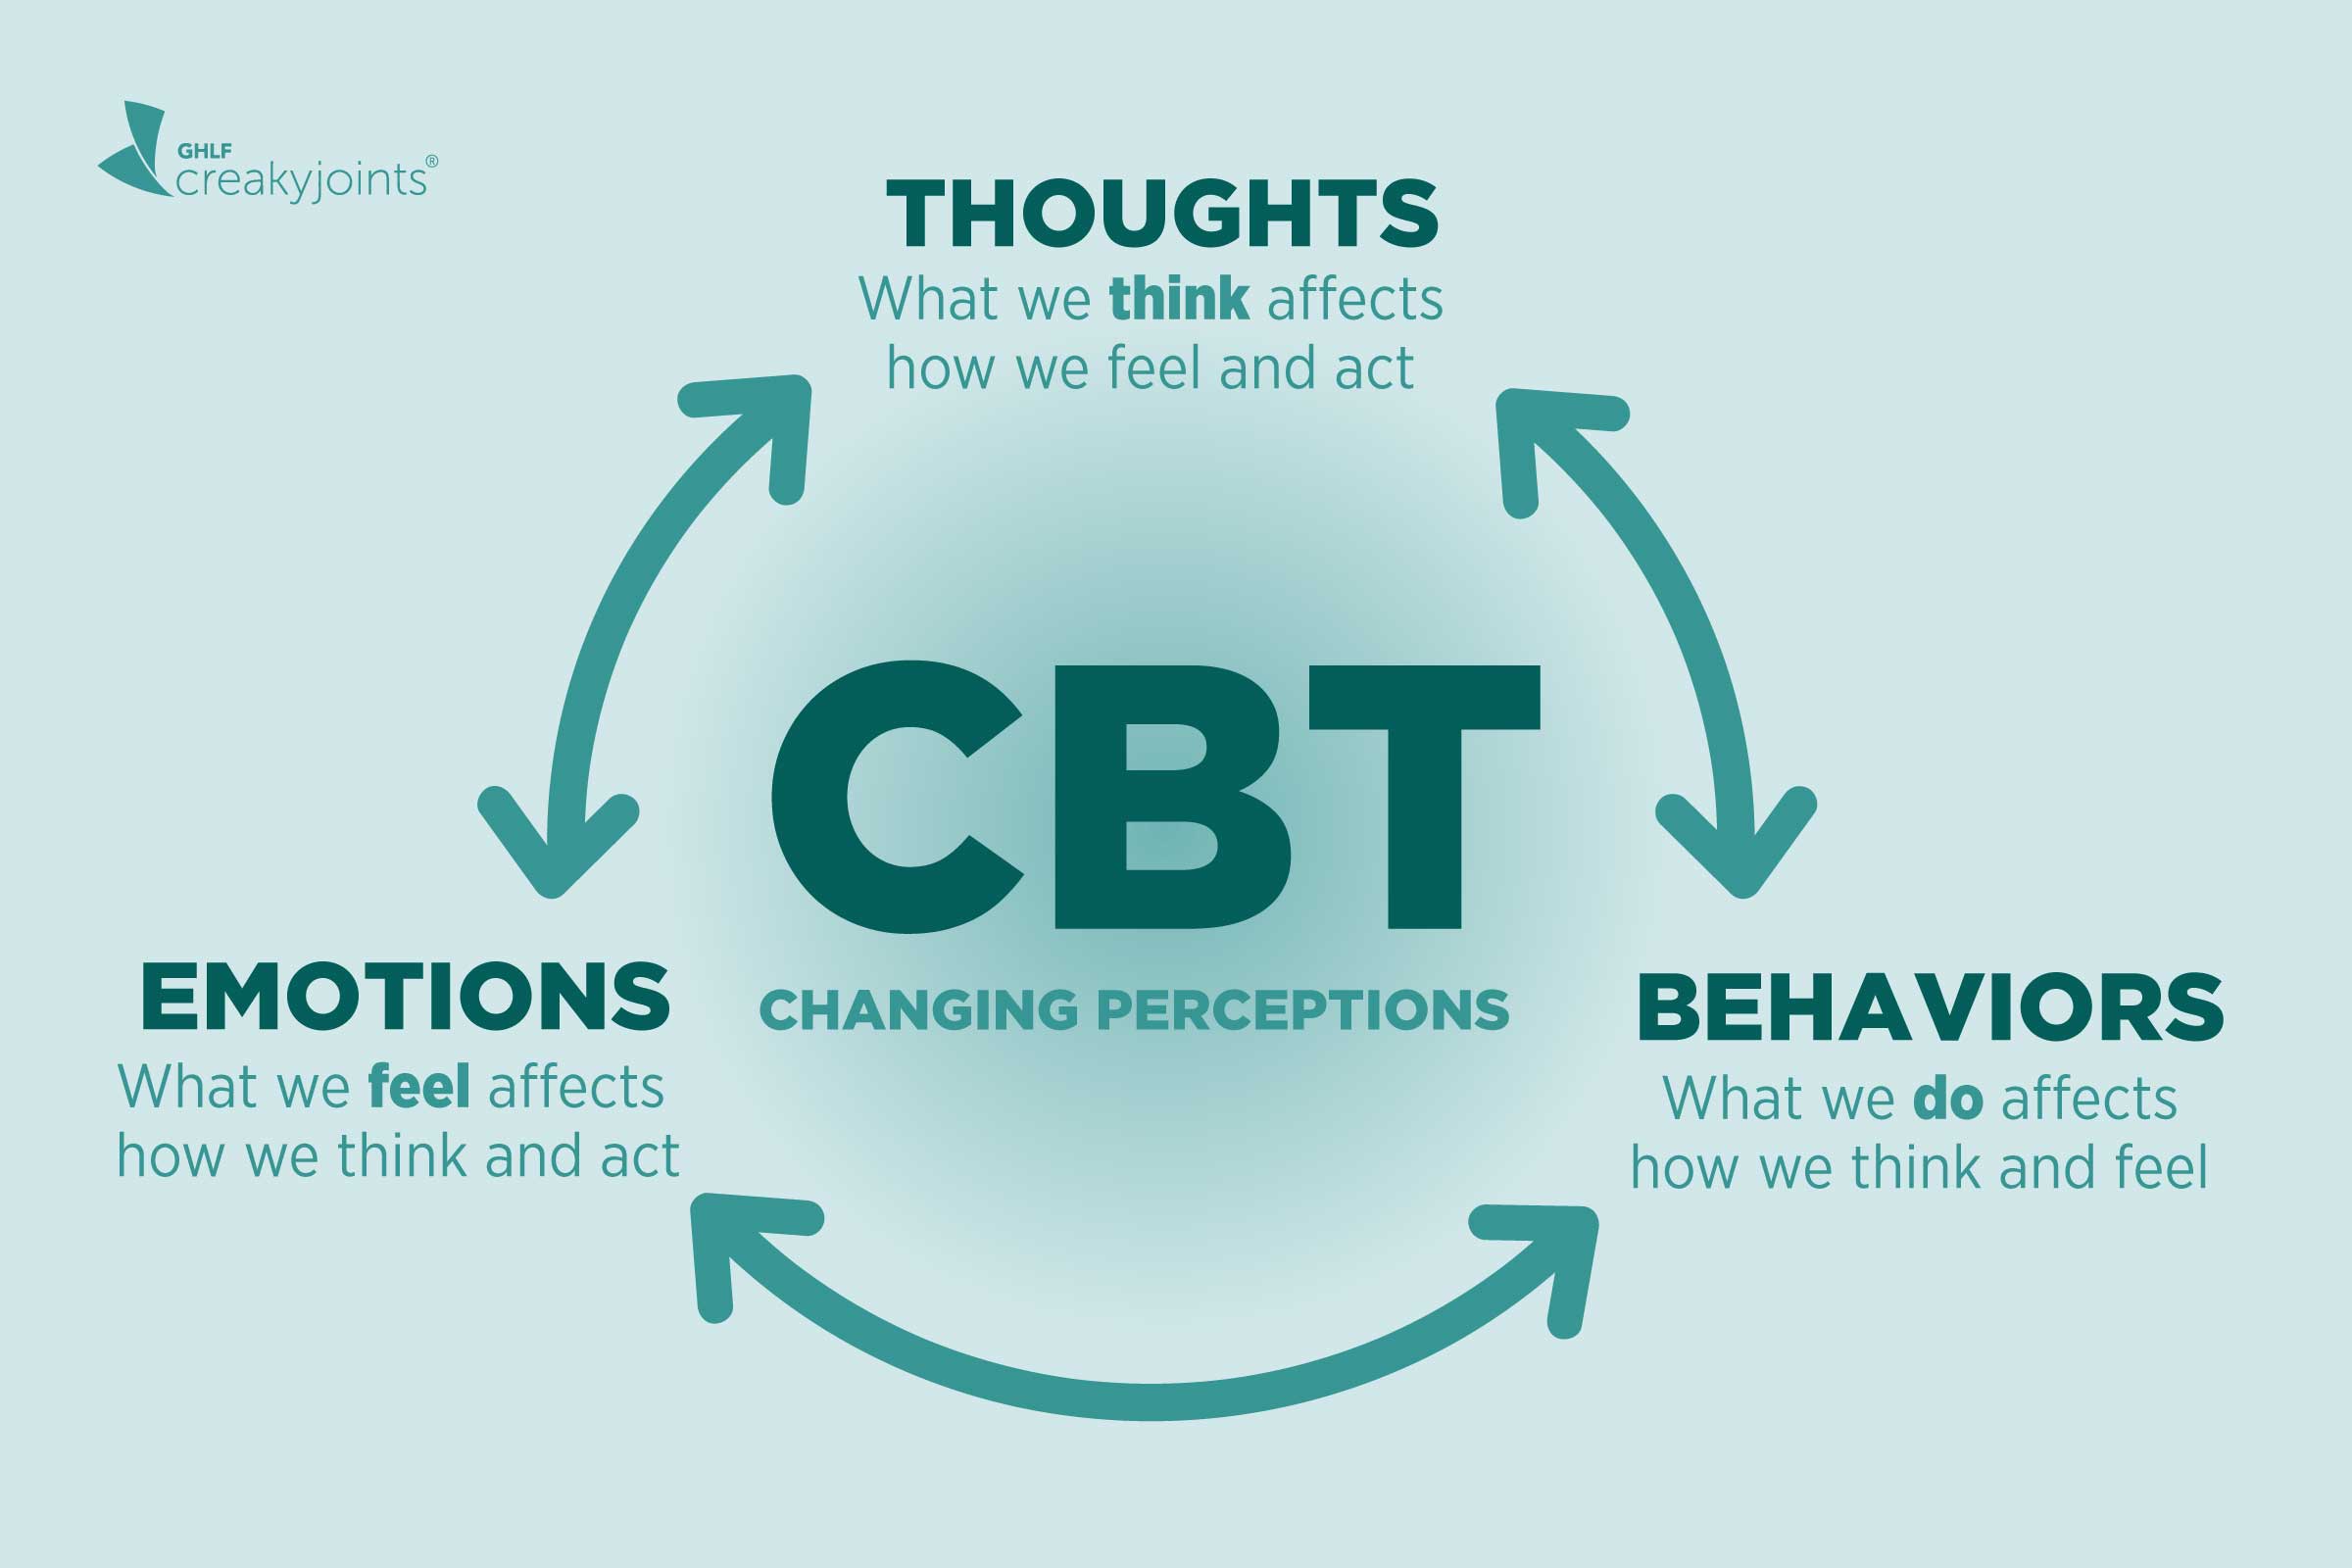 Evidence-based Practice of Cognitive-behavioral Therapy:The Therapy Everyone Believes and Needs